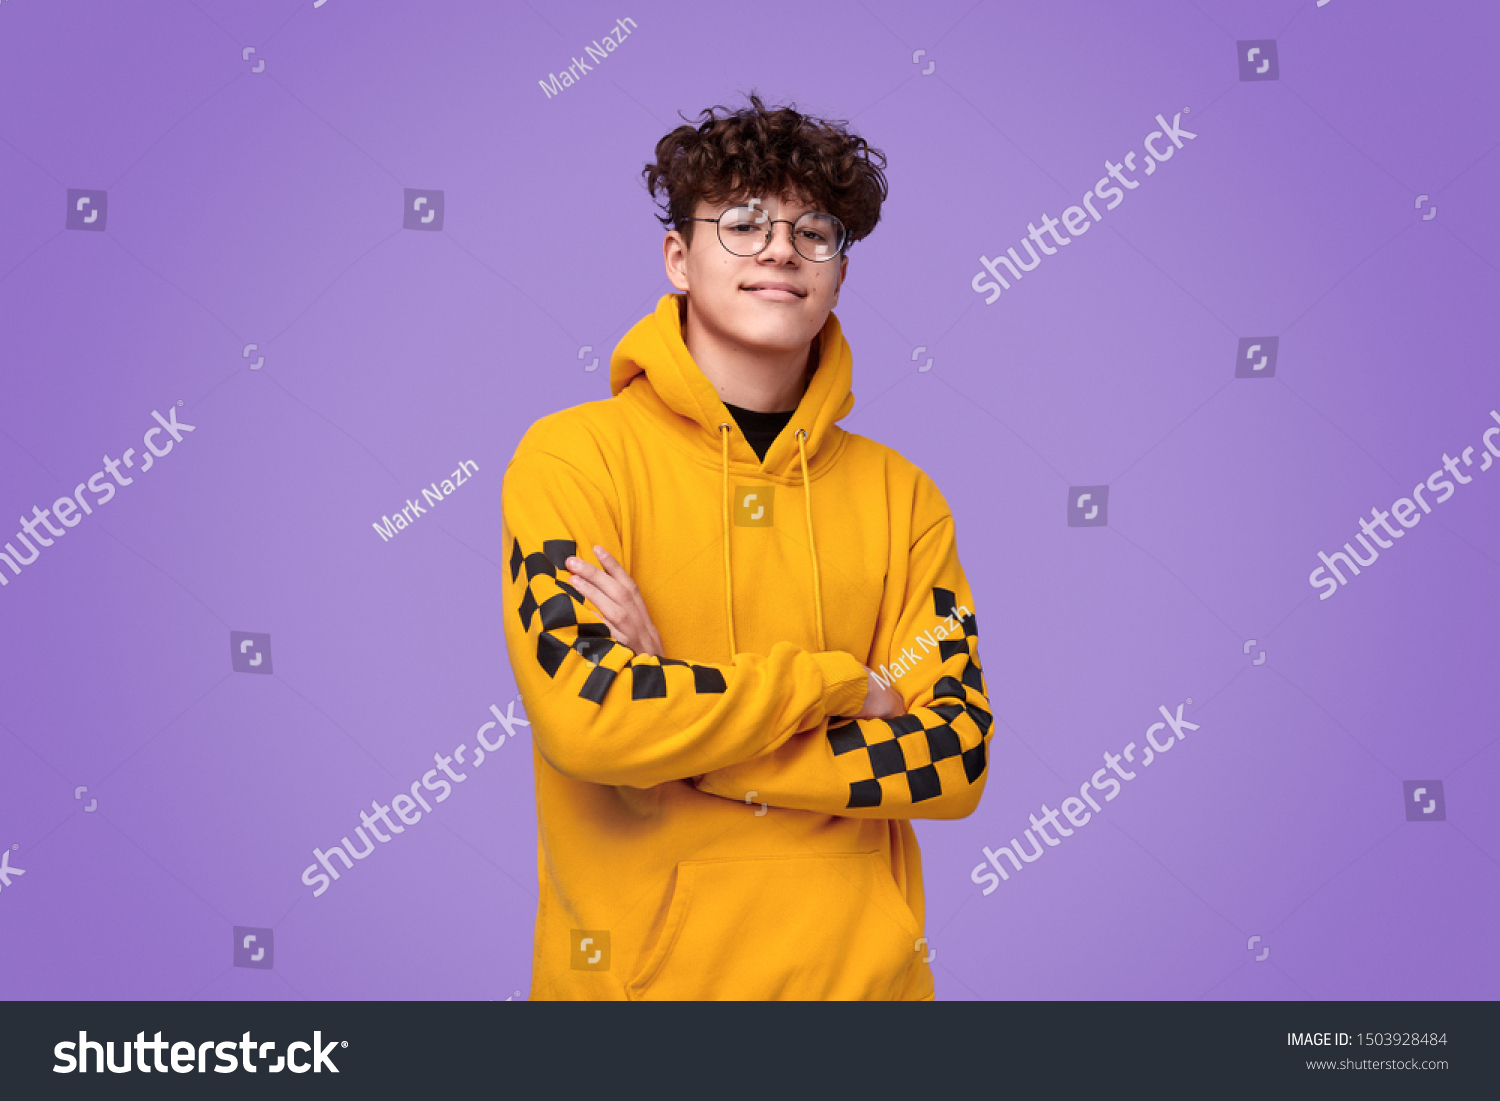 Positive teen boy in yellow hoodie crossing arms and looking at camera against bright violet background #1503928484